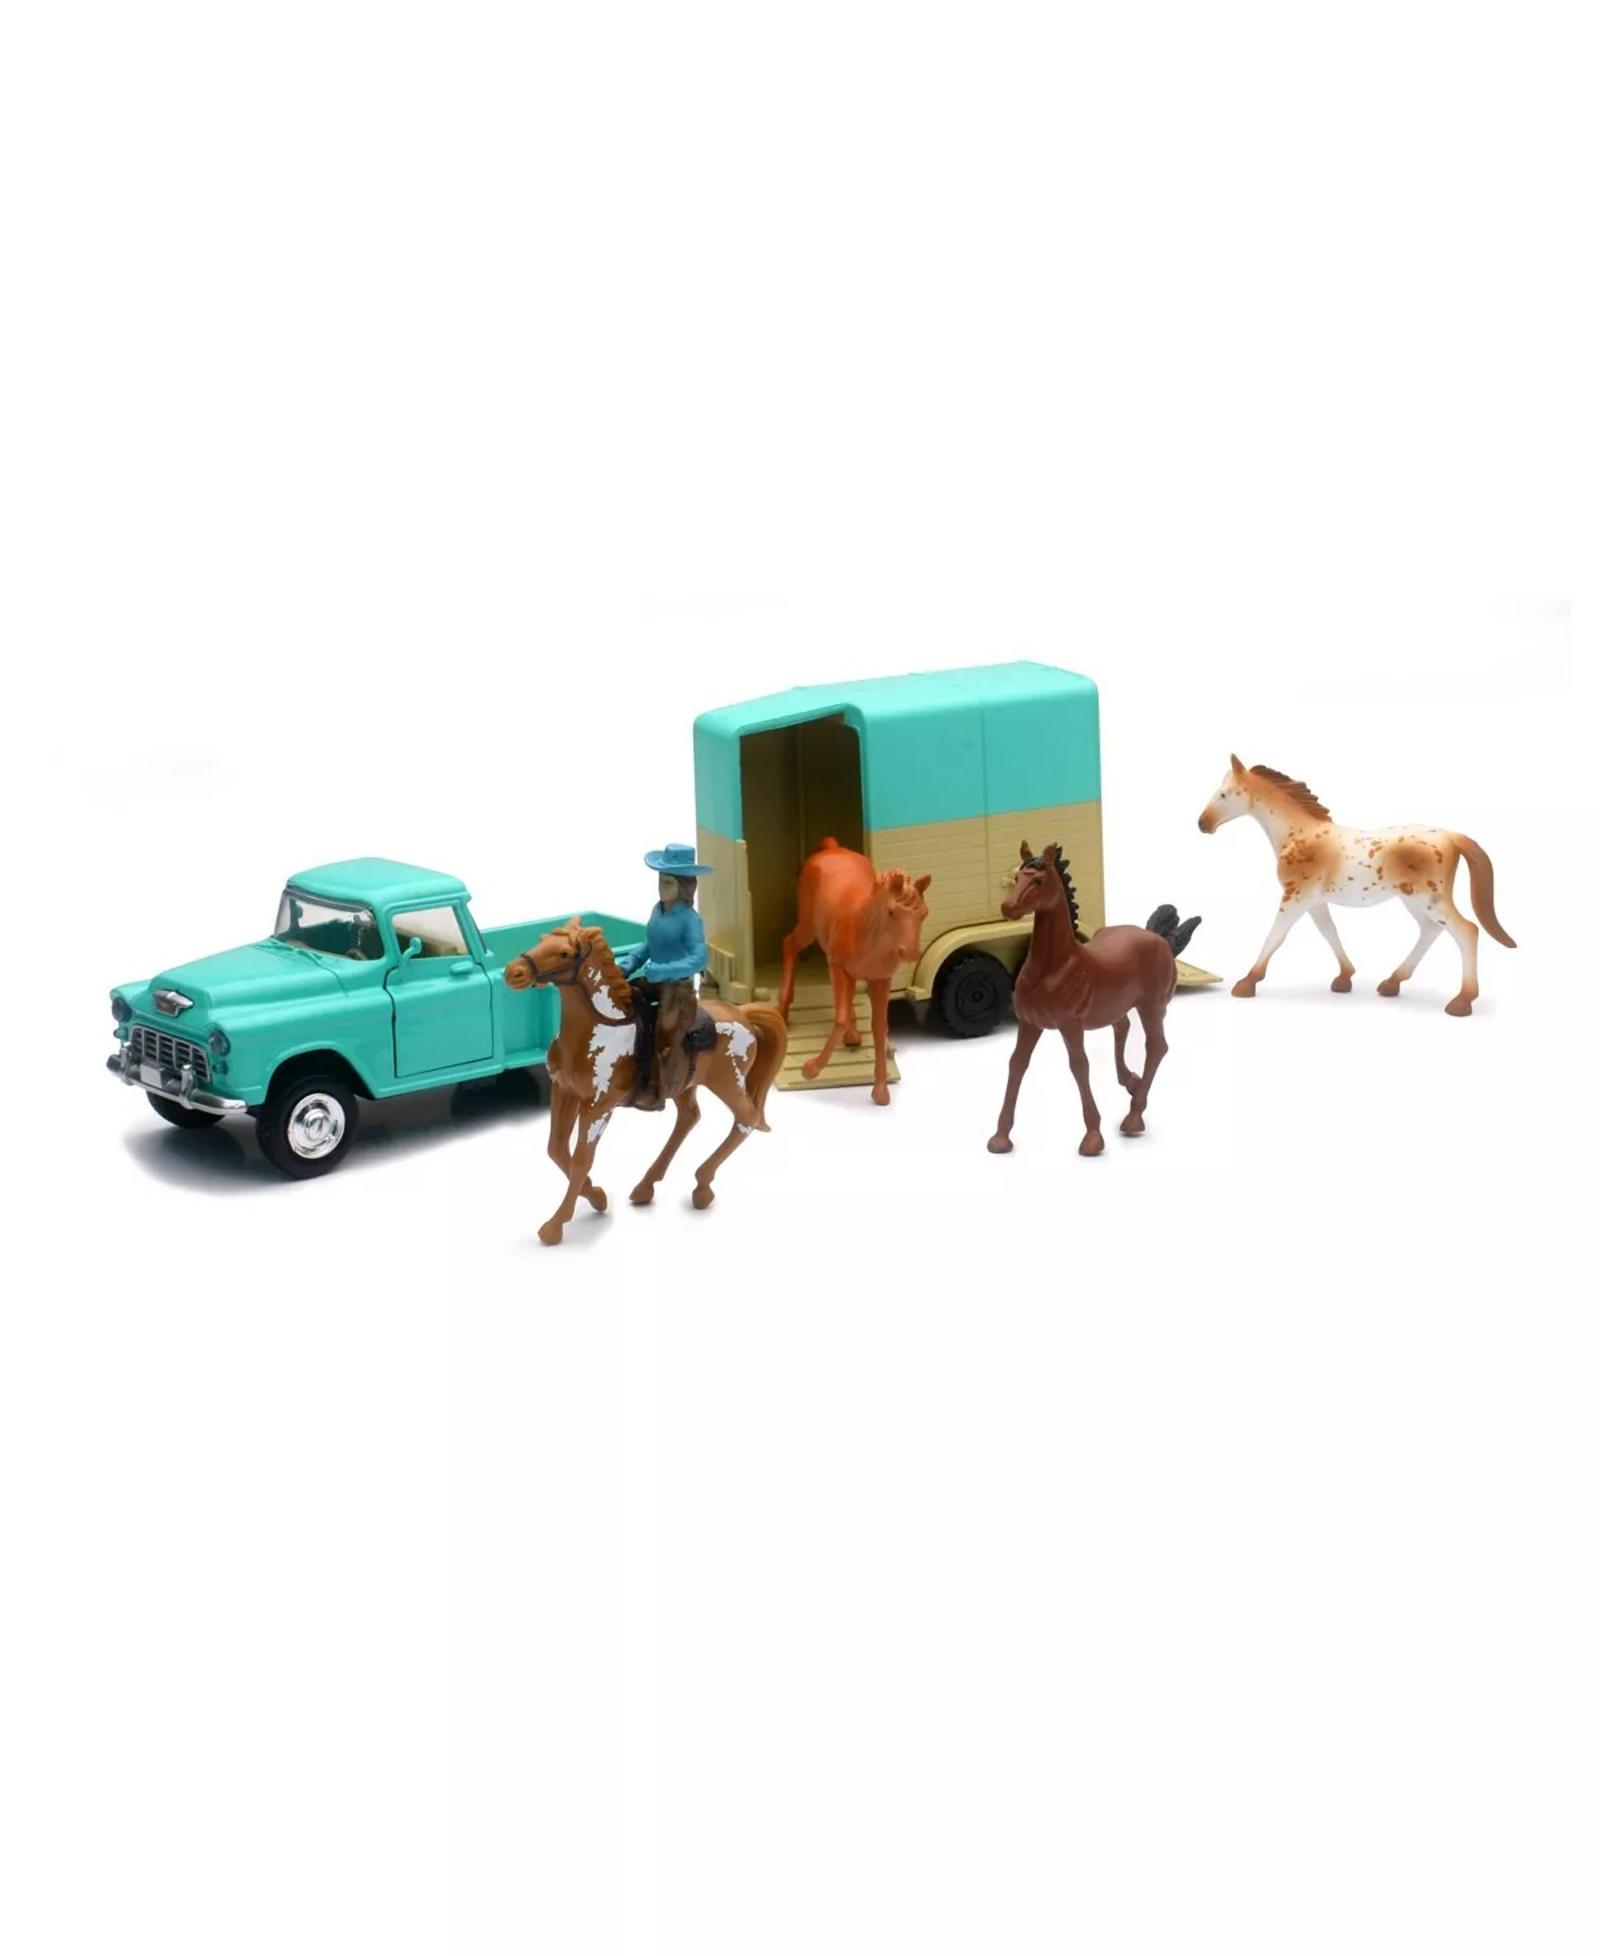 New Ray Toys 1:32 Scale Vintage-Like Pick Up Truck 7-Piece Set